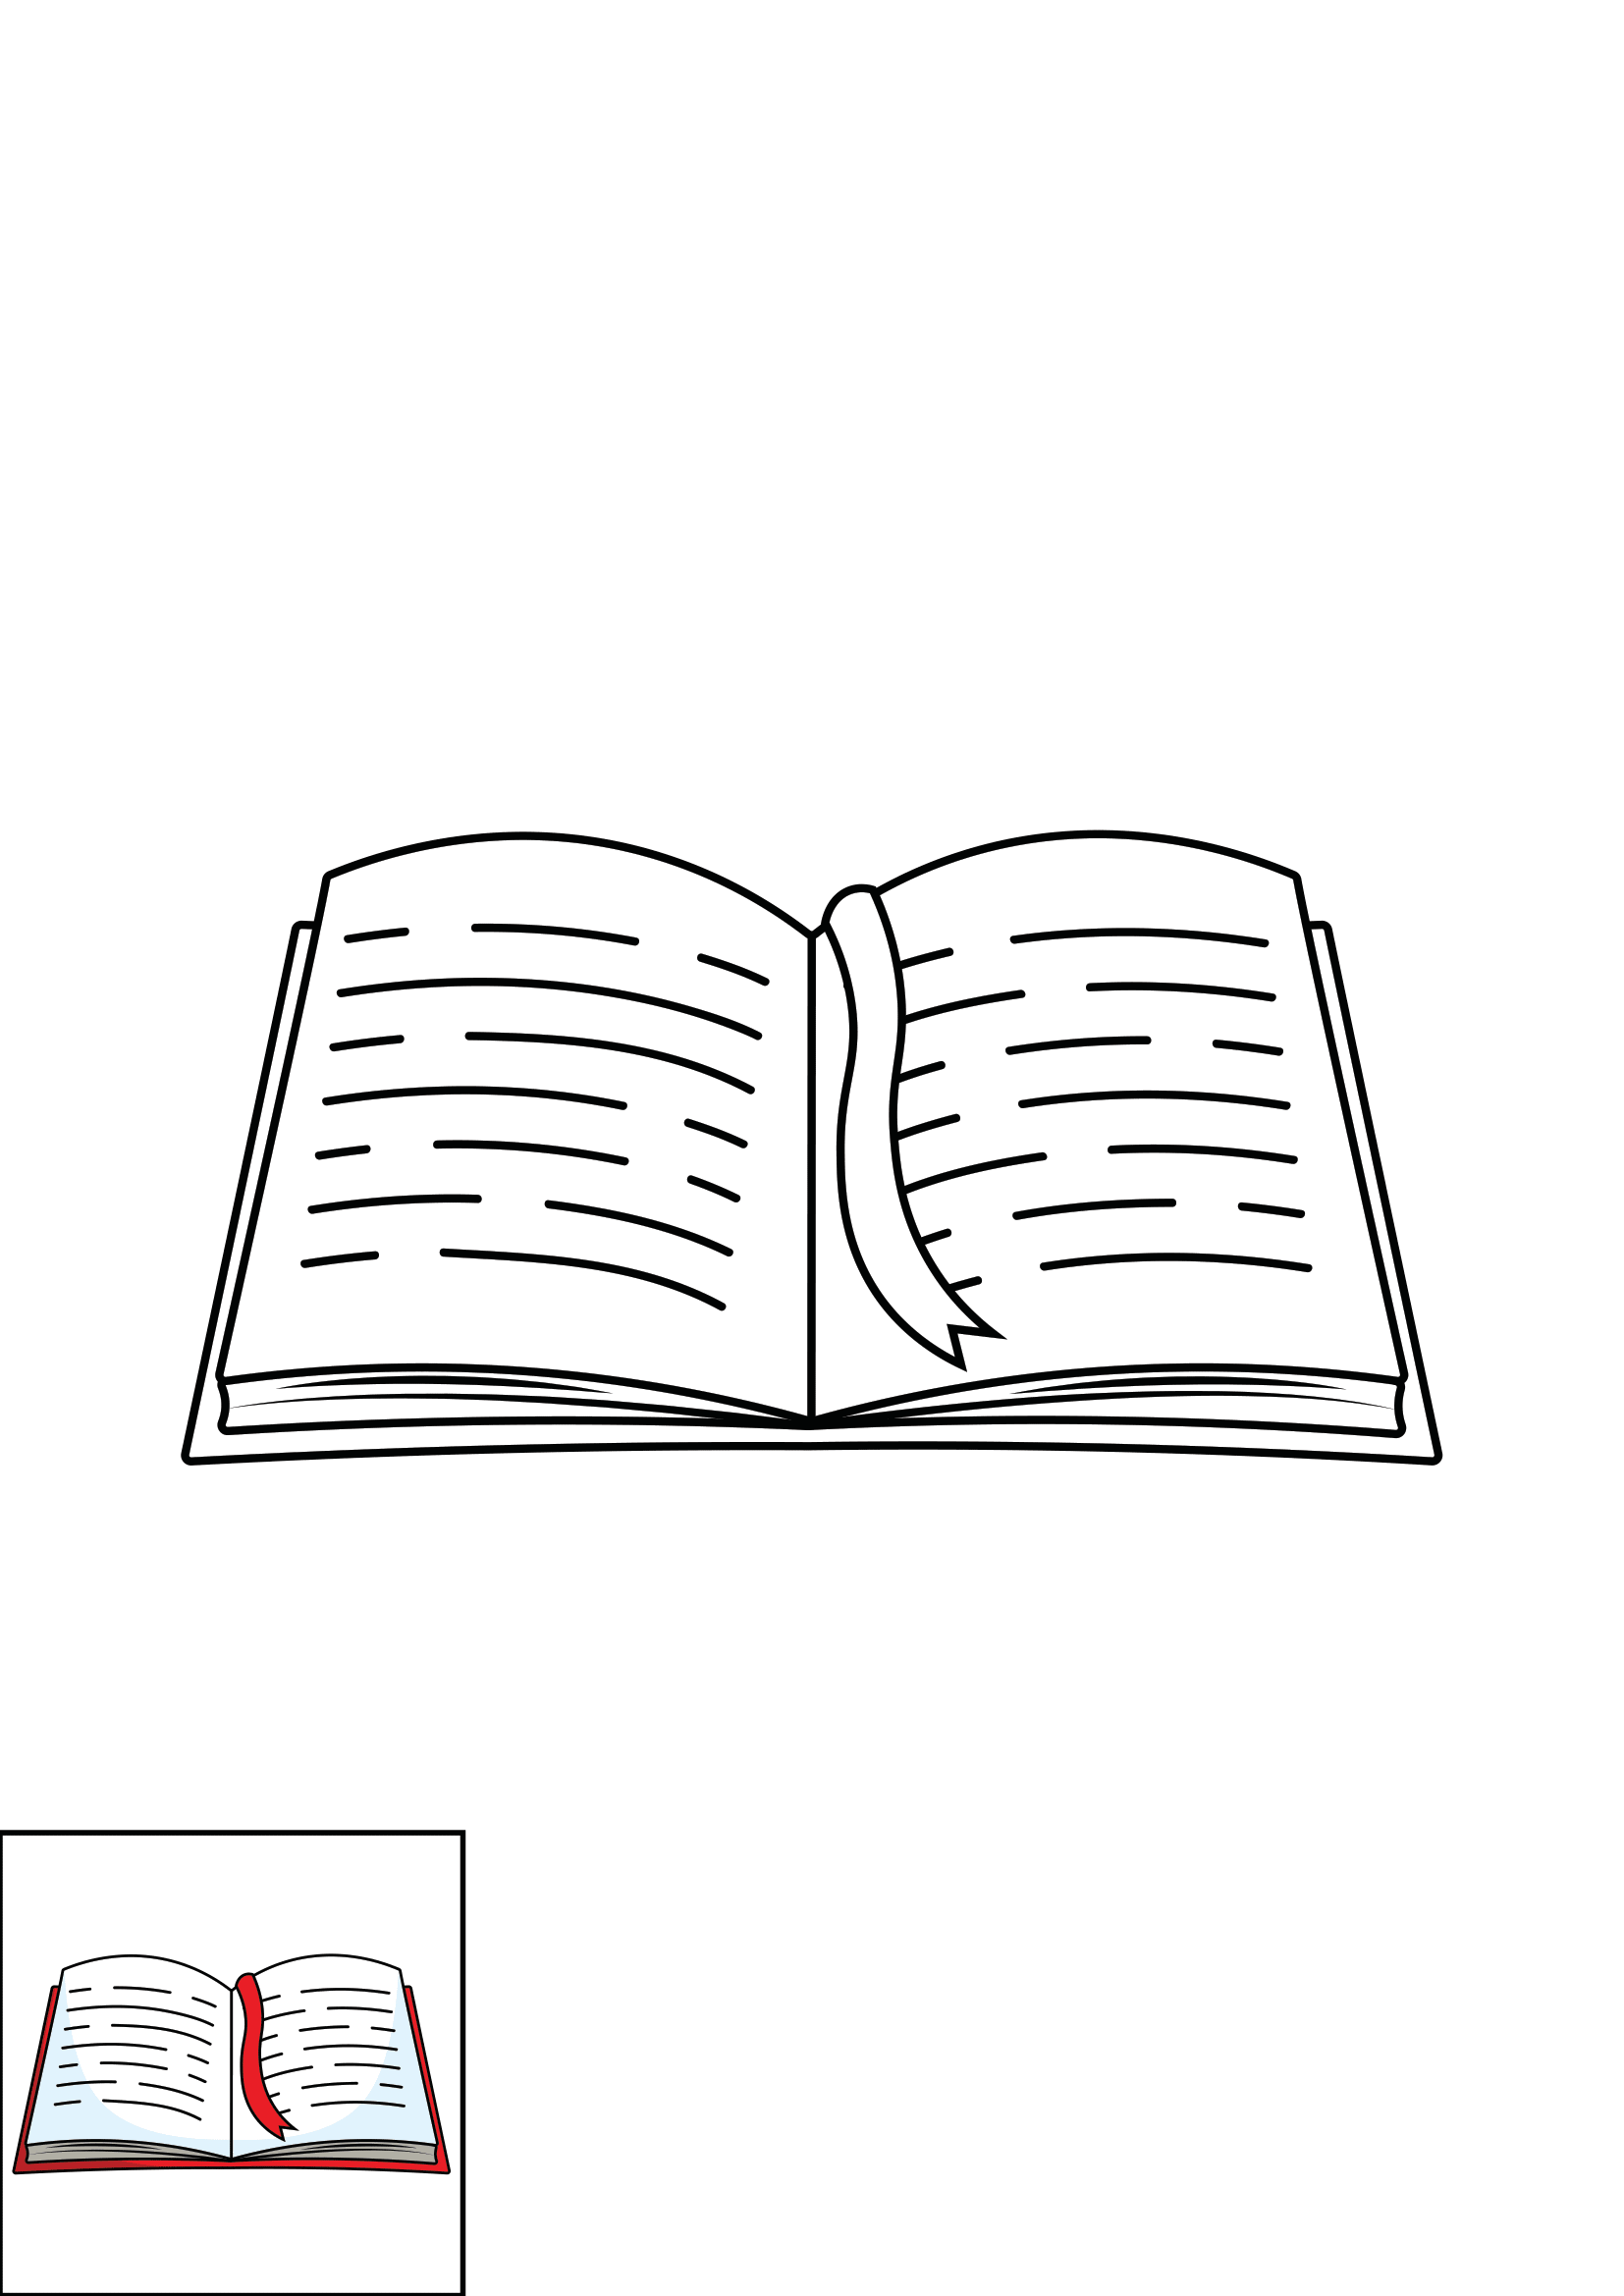 How to Draw An Open Book Step by Step Printable Color